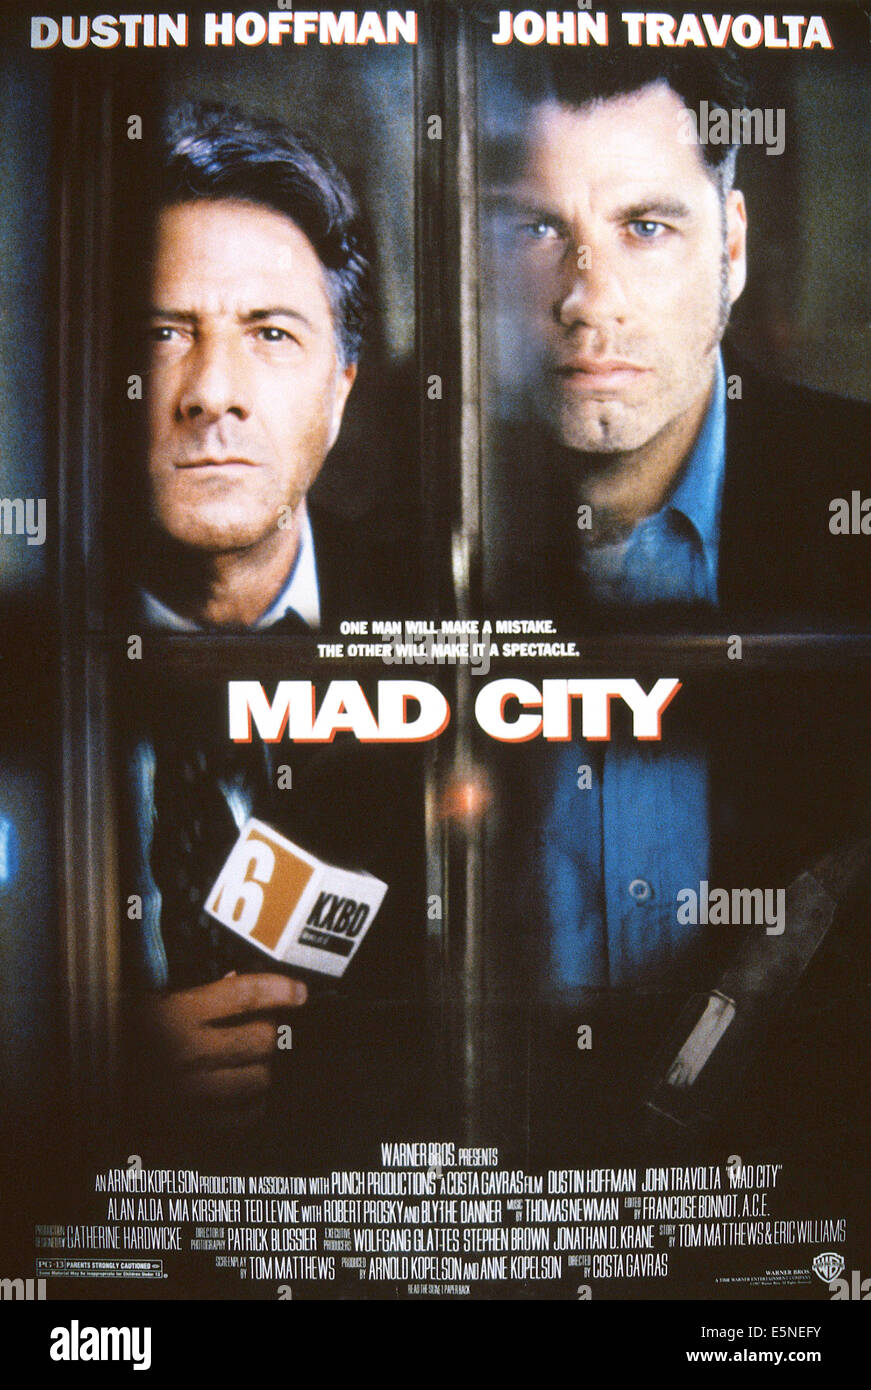 MAD CITY, US poster, from left, Dustin Hoffman, John Travolta, 1997, ©Warner Brothers/courtesy Everett Collection Stock Photo